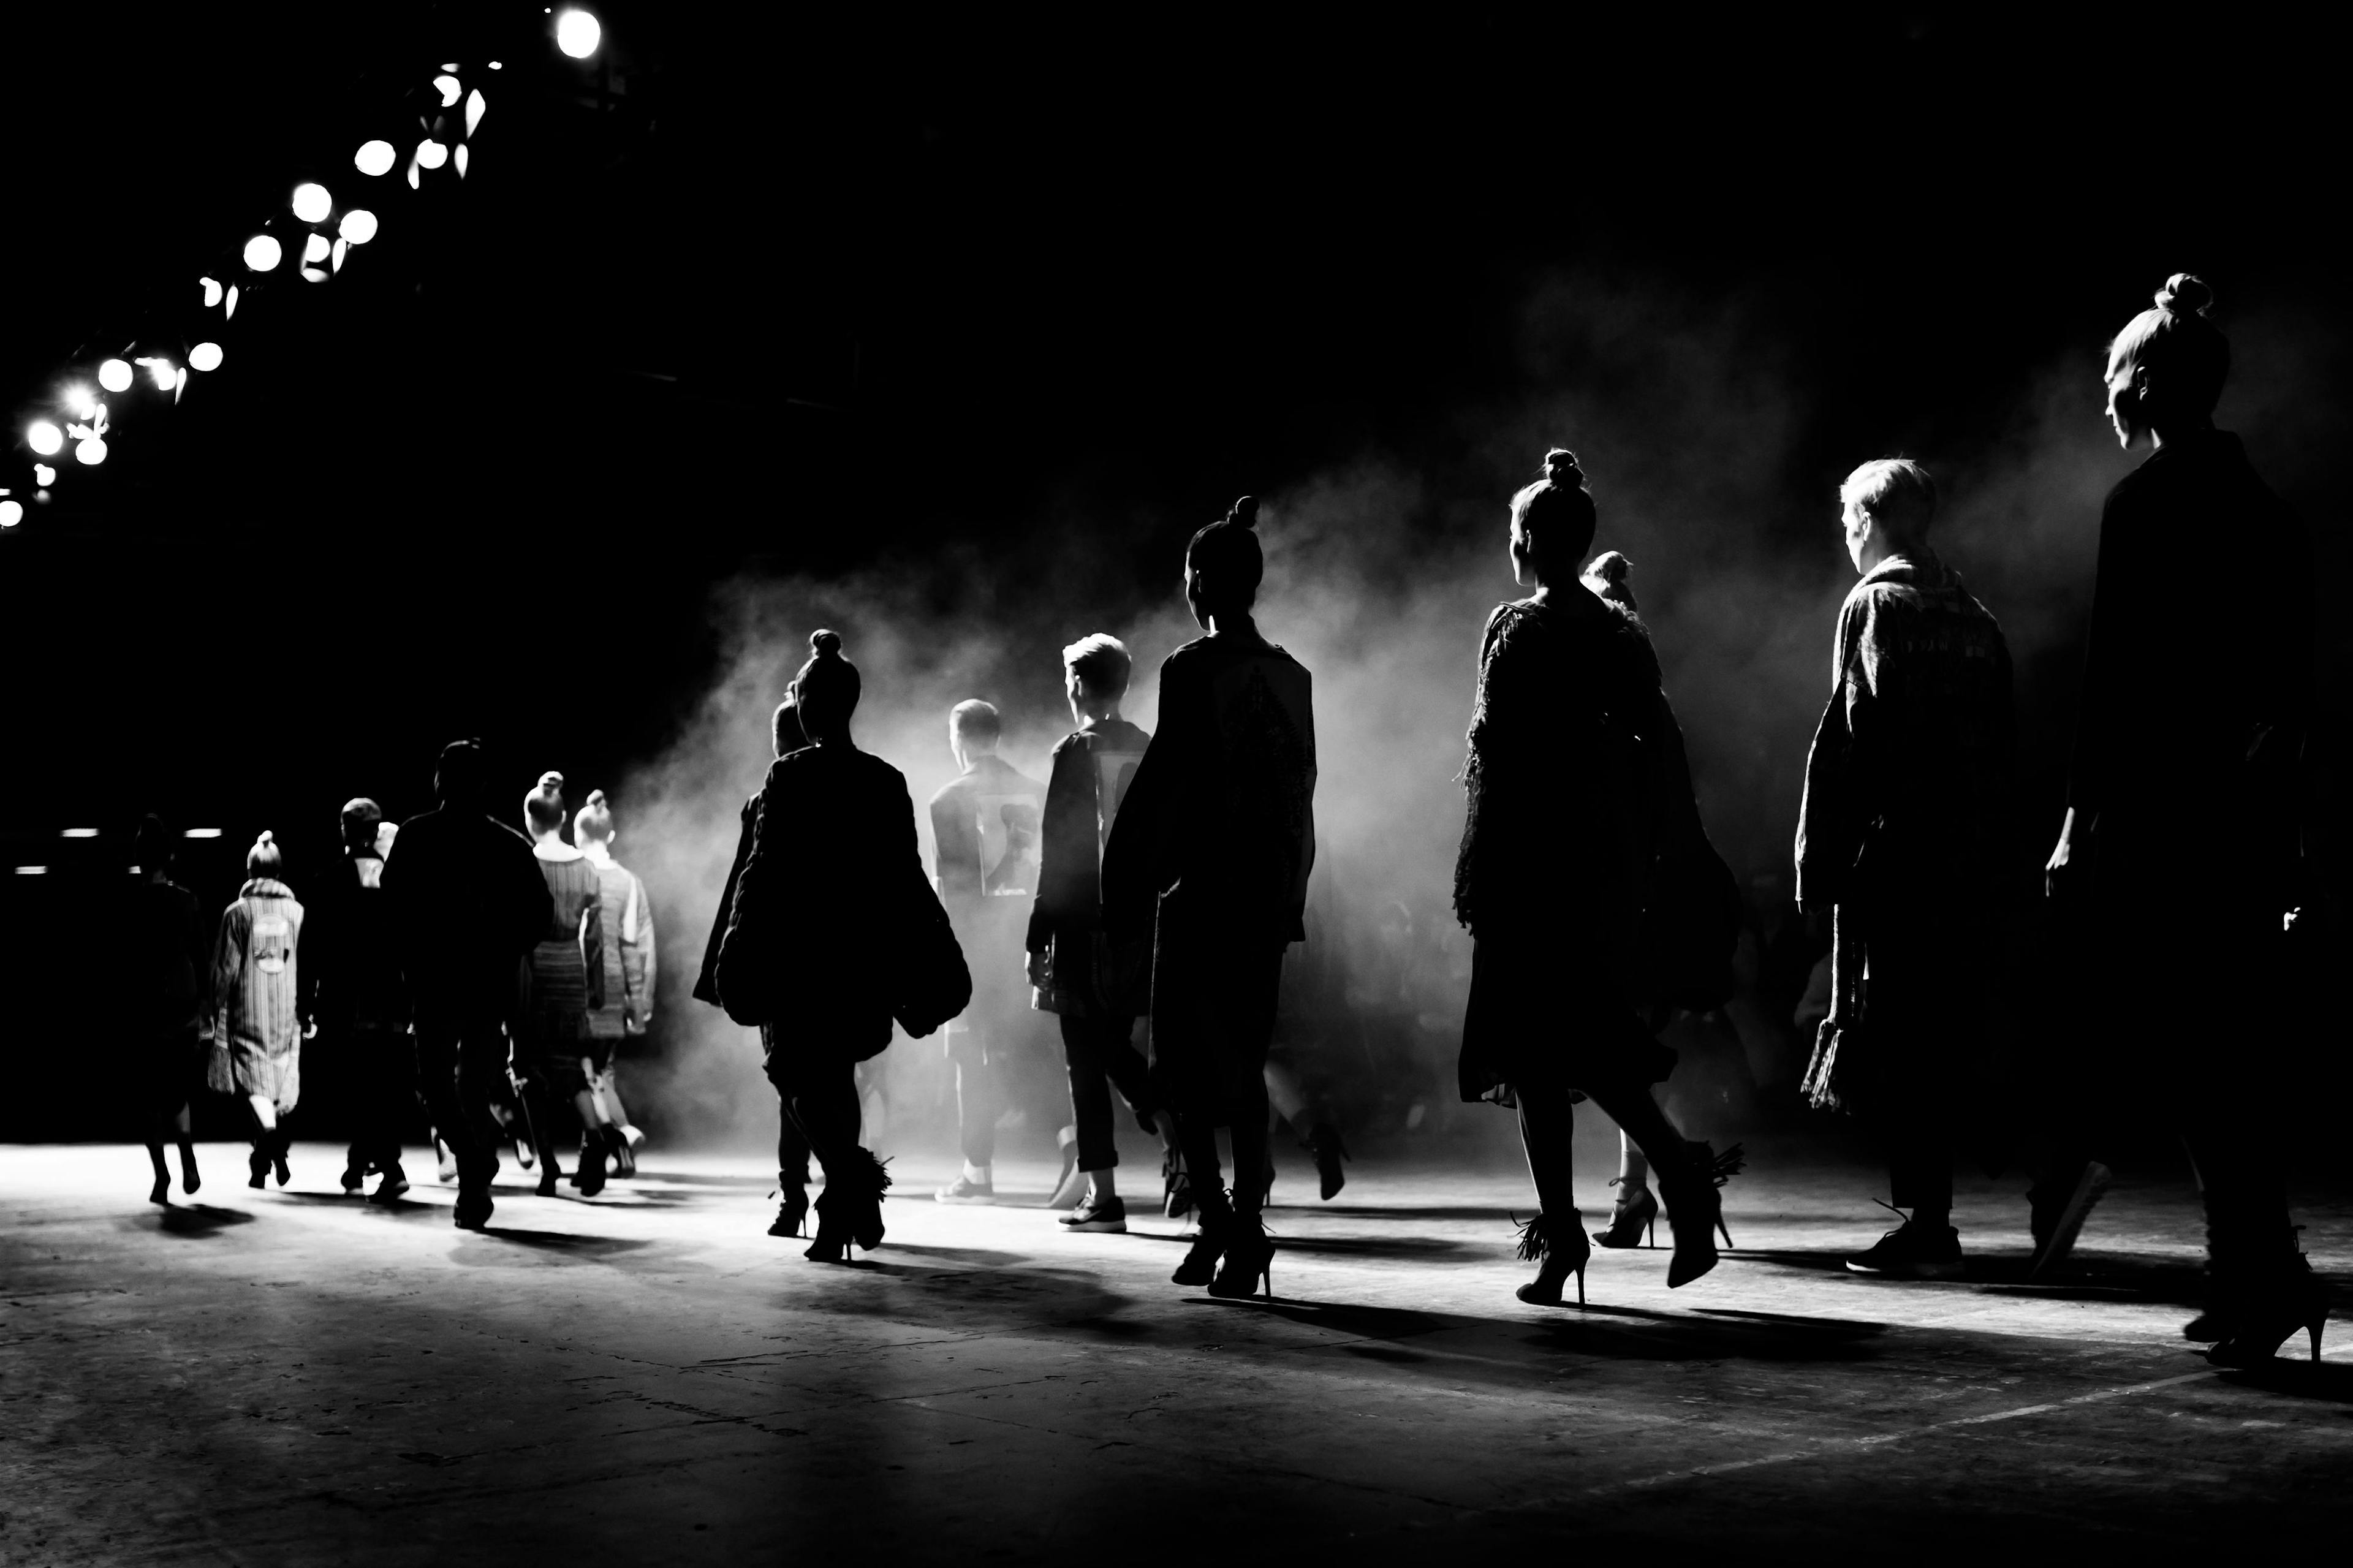 dress,unrecognizable,london,beauty,beautiful,cast,trendy,white,model,female,models,finale,runway,collection,fashionable,look,silhouettes,background,catwalk,style,adult,week,woman,fashion week,fashion model,show,industry,milan,modern,design,casting,event,elegant,couture,black,milano,italian,designer,people,clothes,fashion catwalk,call,stylish,elegance,stage,york,posing,walk,fashion person walking people coat silhouette adult male man lighting shoe